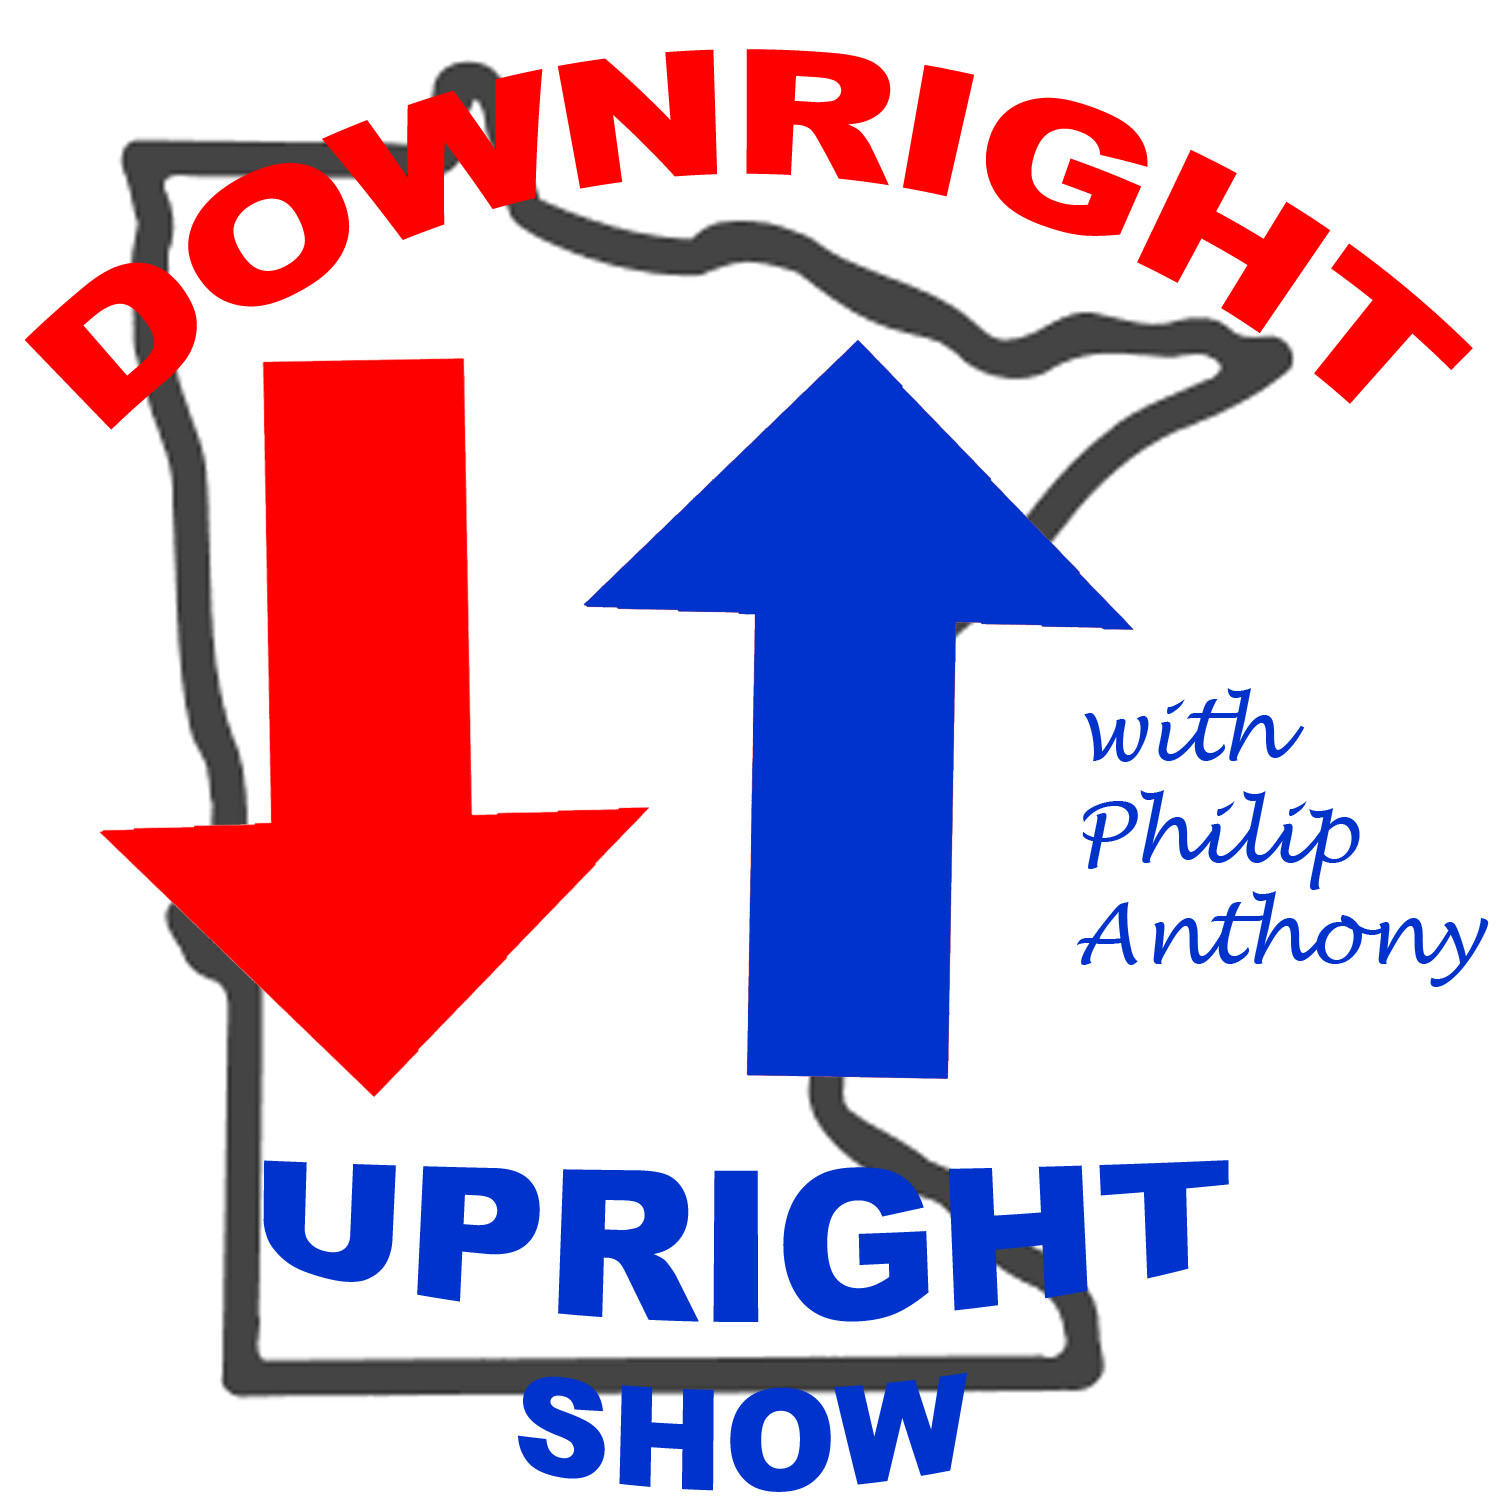 The Downright Upright Show with Philip Anthony